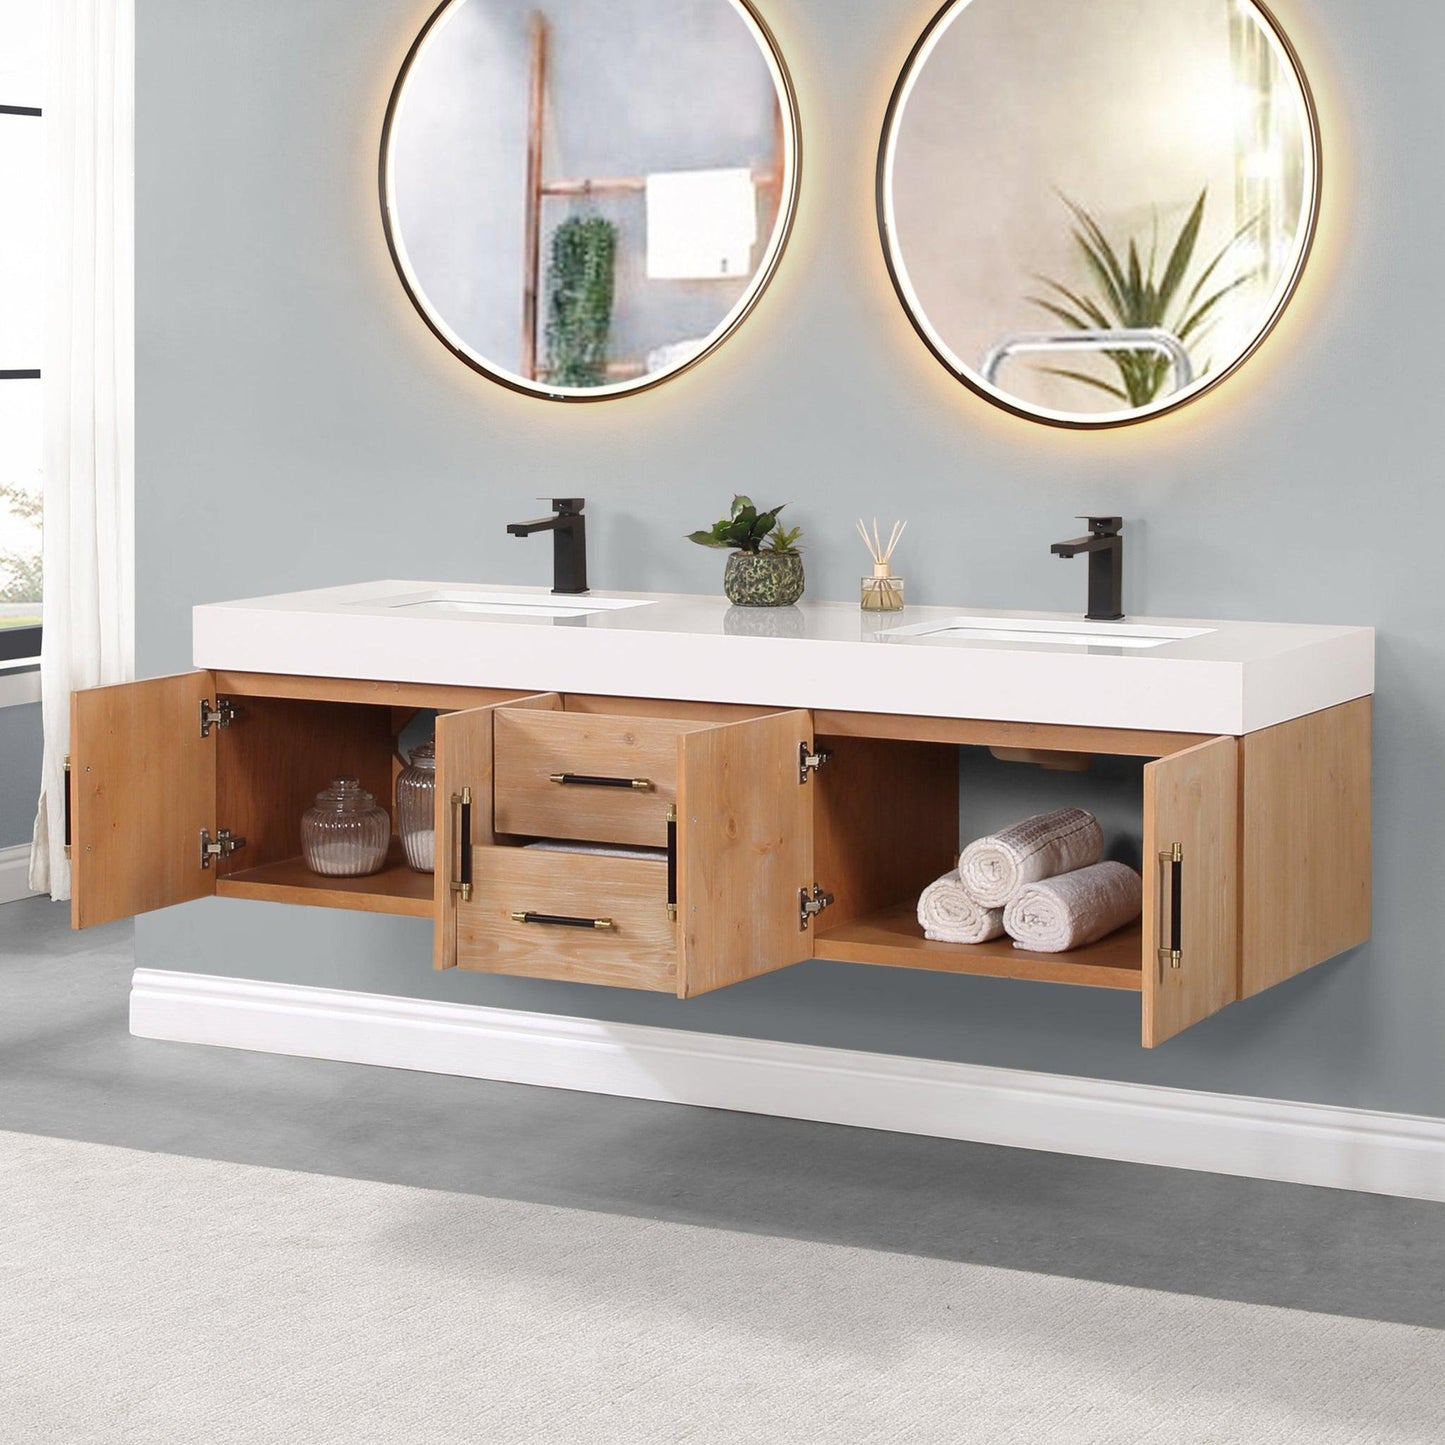 Altair Corchia 72" Light Brown Wall-Mounted Double Bathroom Vanity Set With White Composite Stone Top, Two Rectangular Undermount Ceramic Sinks, and Overflow